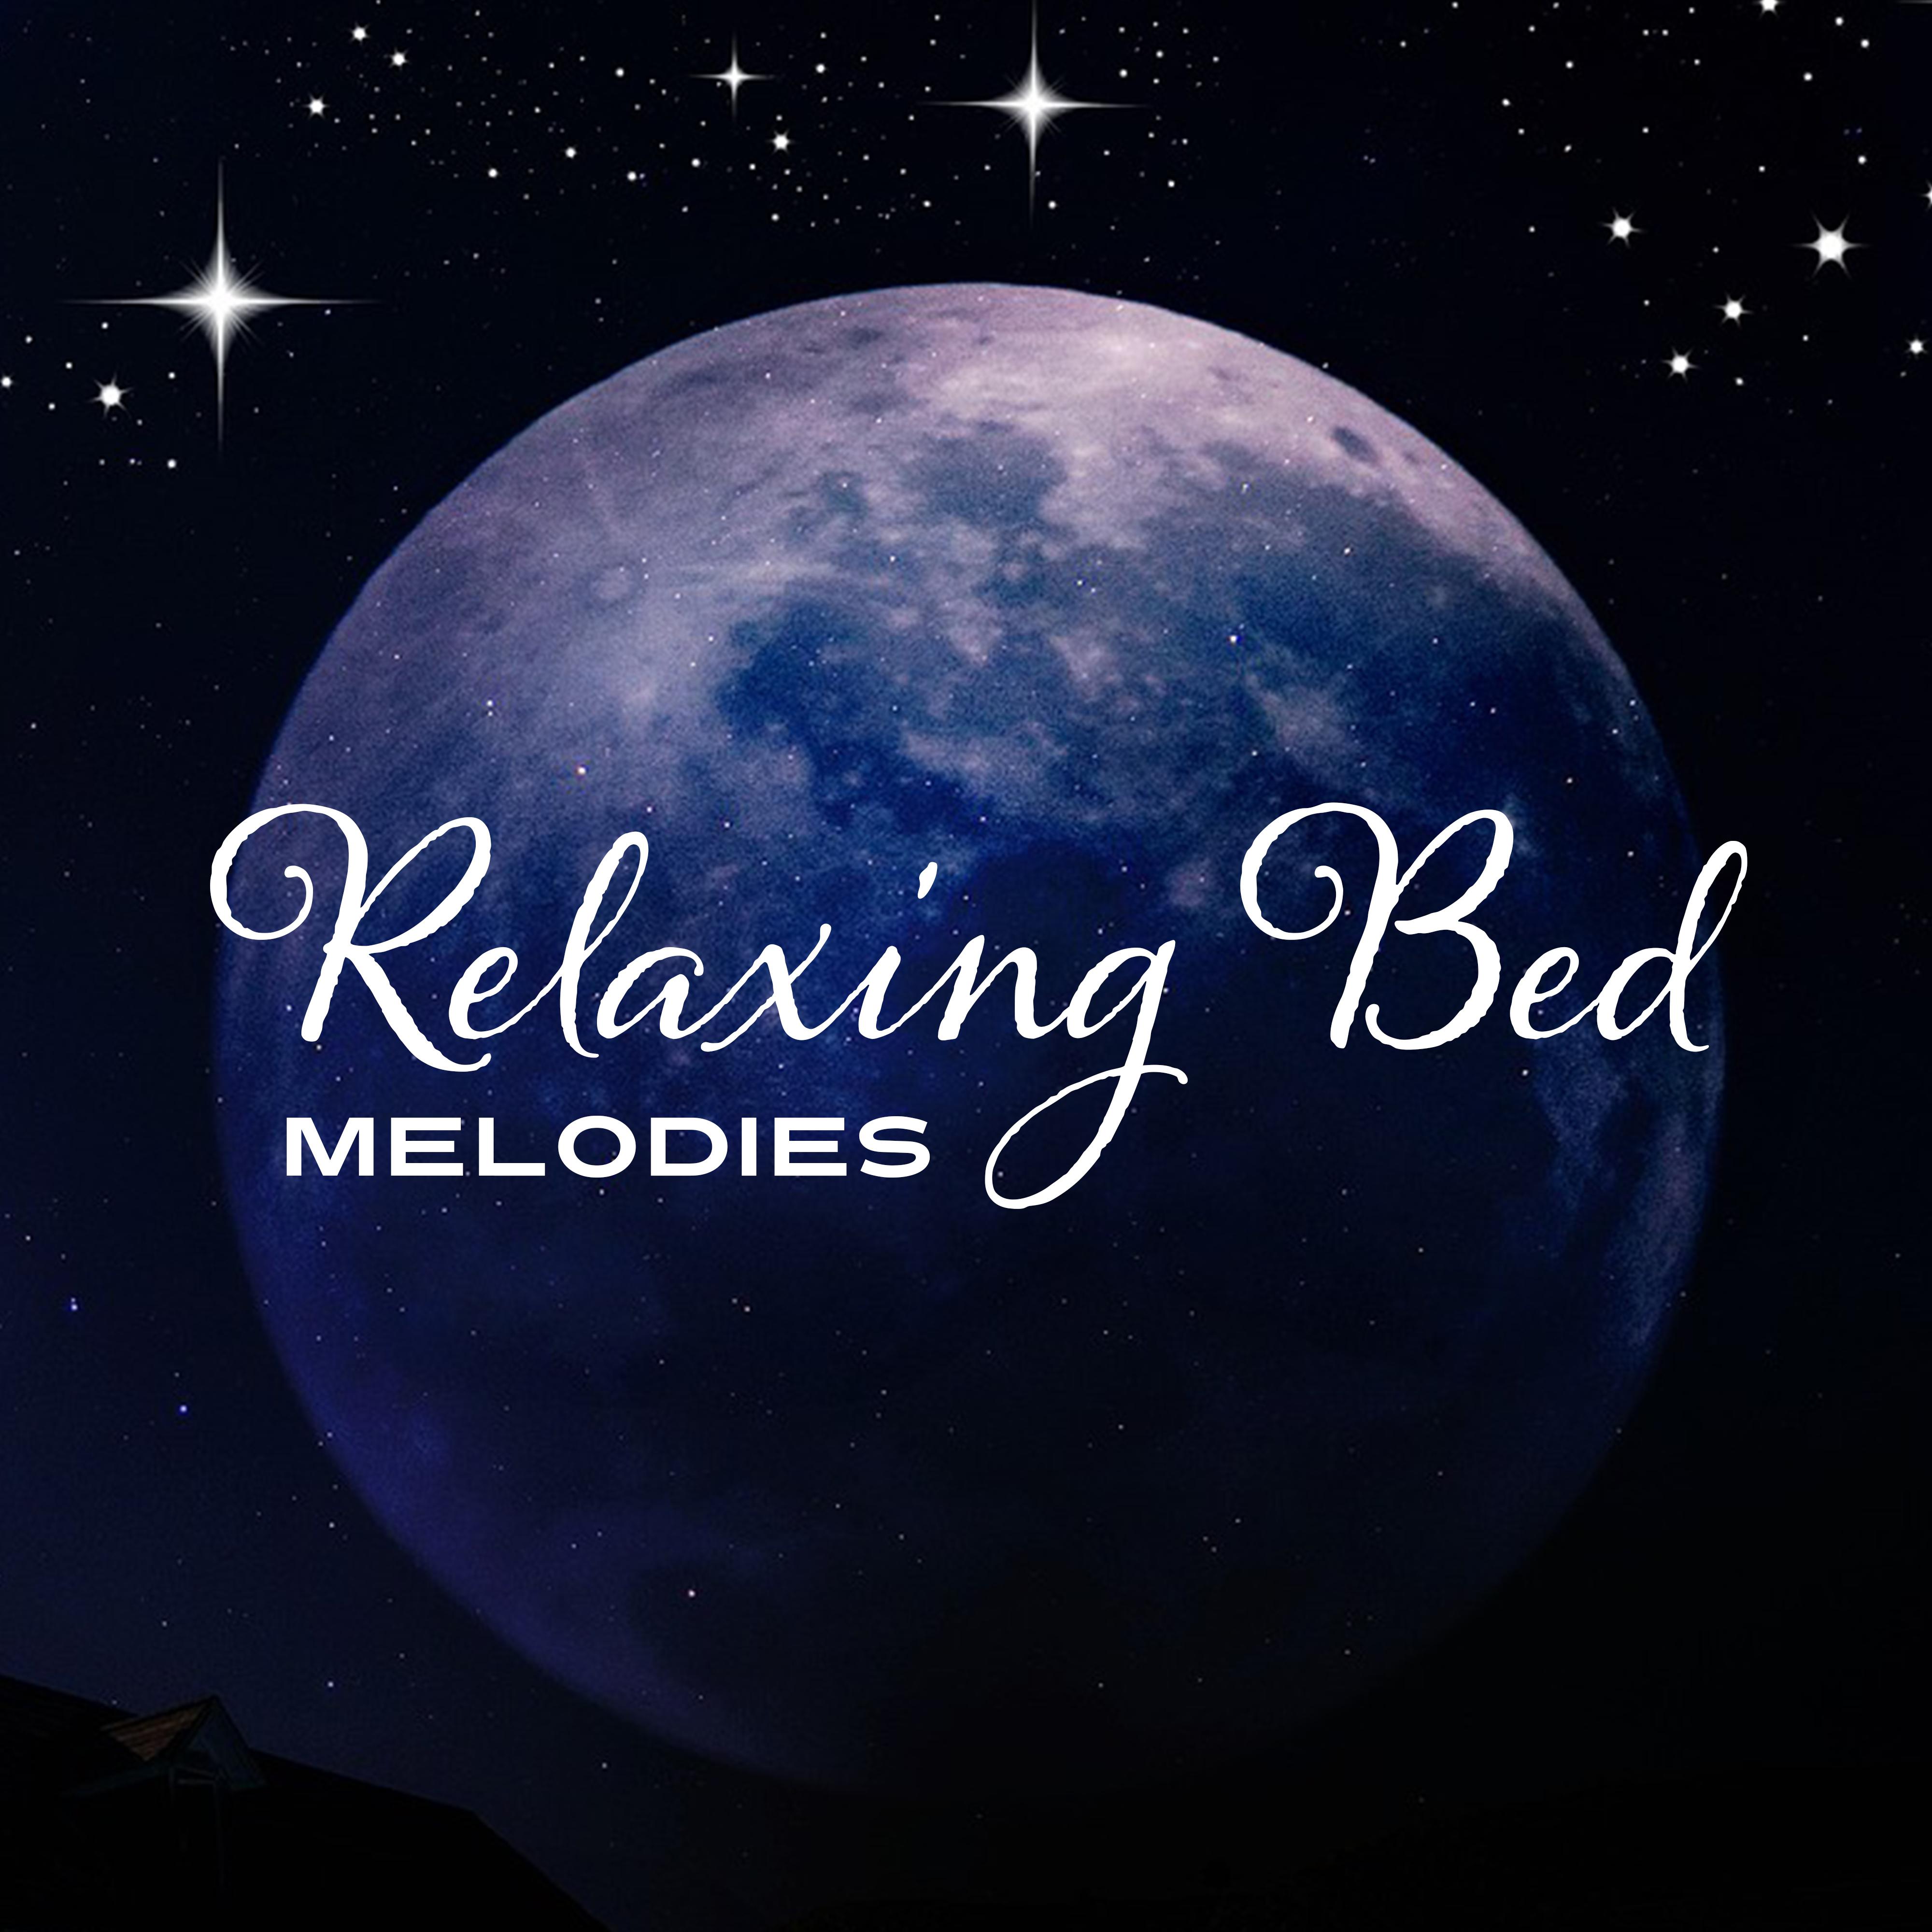 Relaxing Bed Melodies